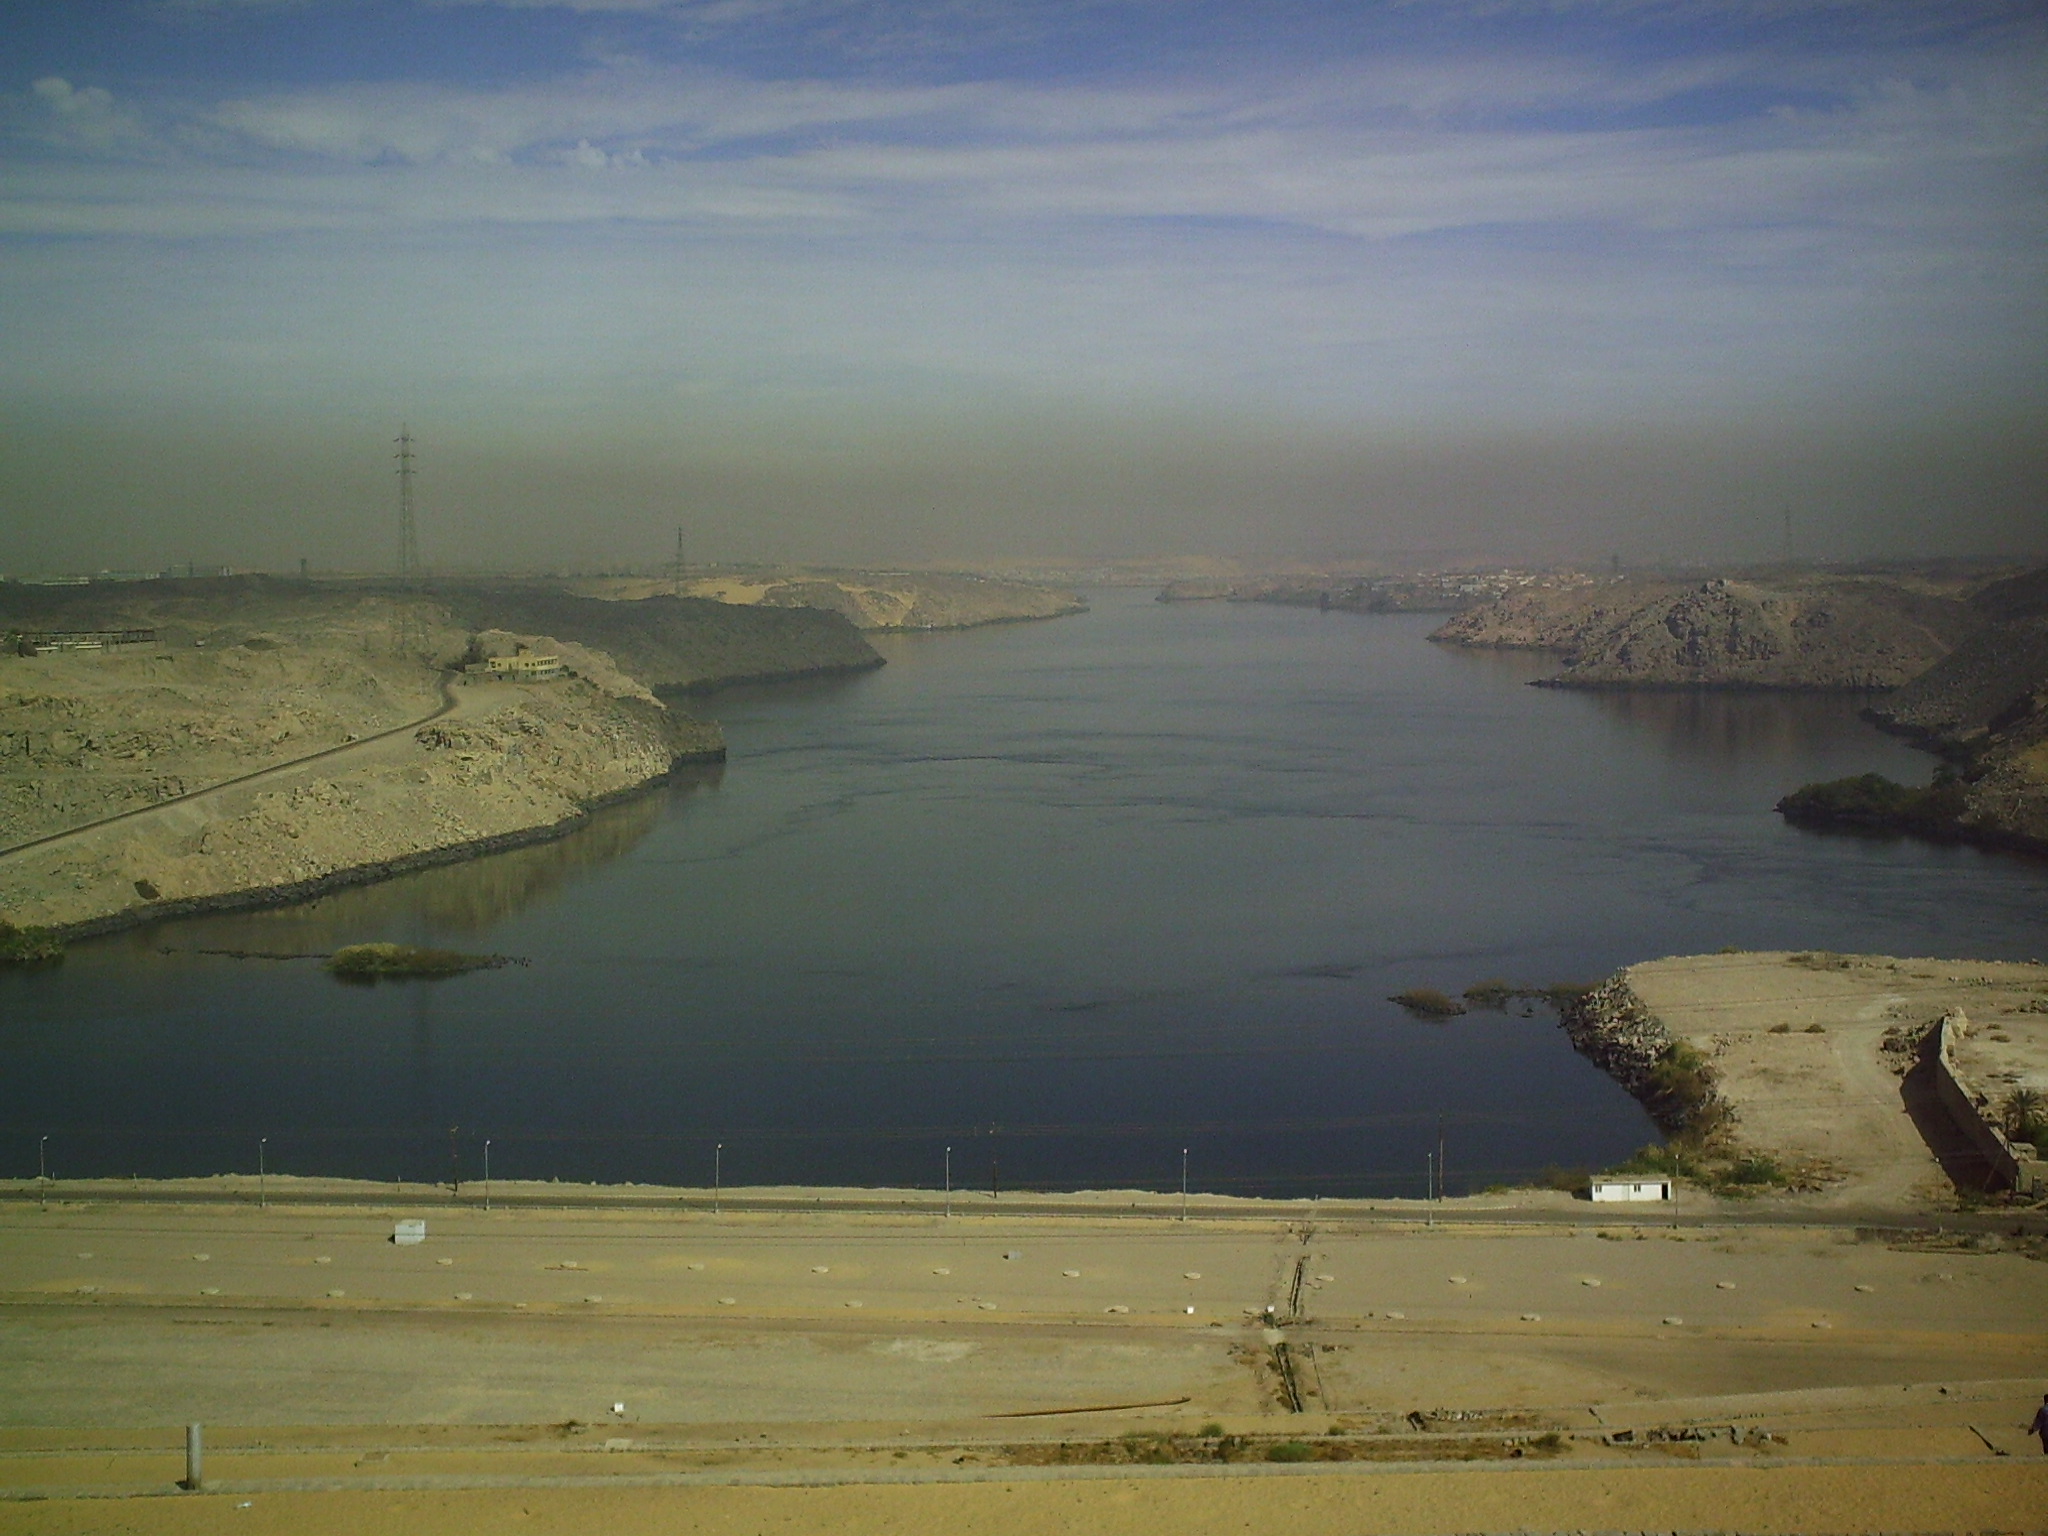  View of Lake Nasser from the top of the High Dam of the Nile on the way to Abu Simbel 